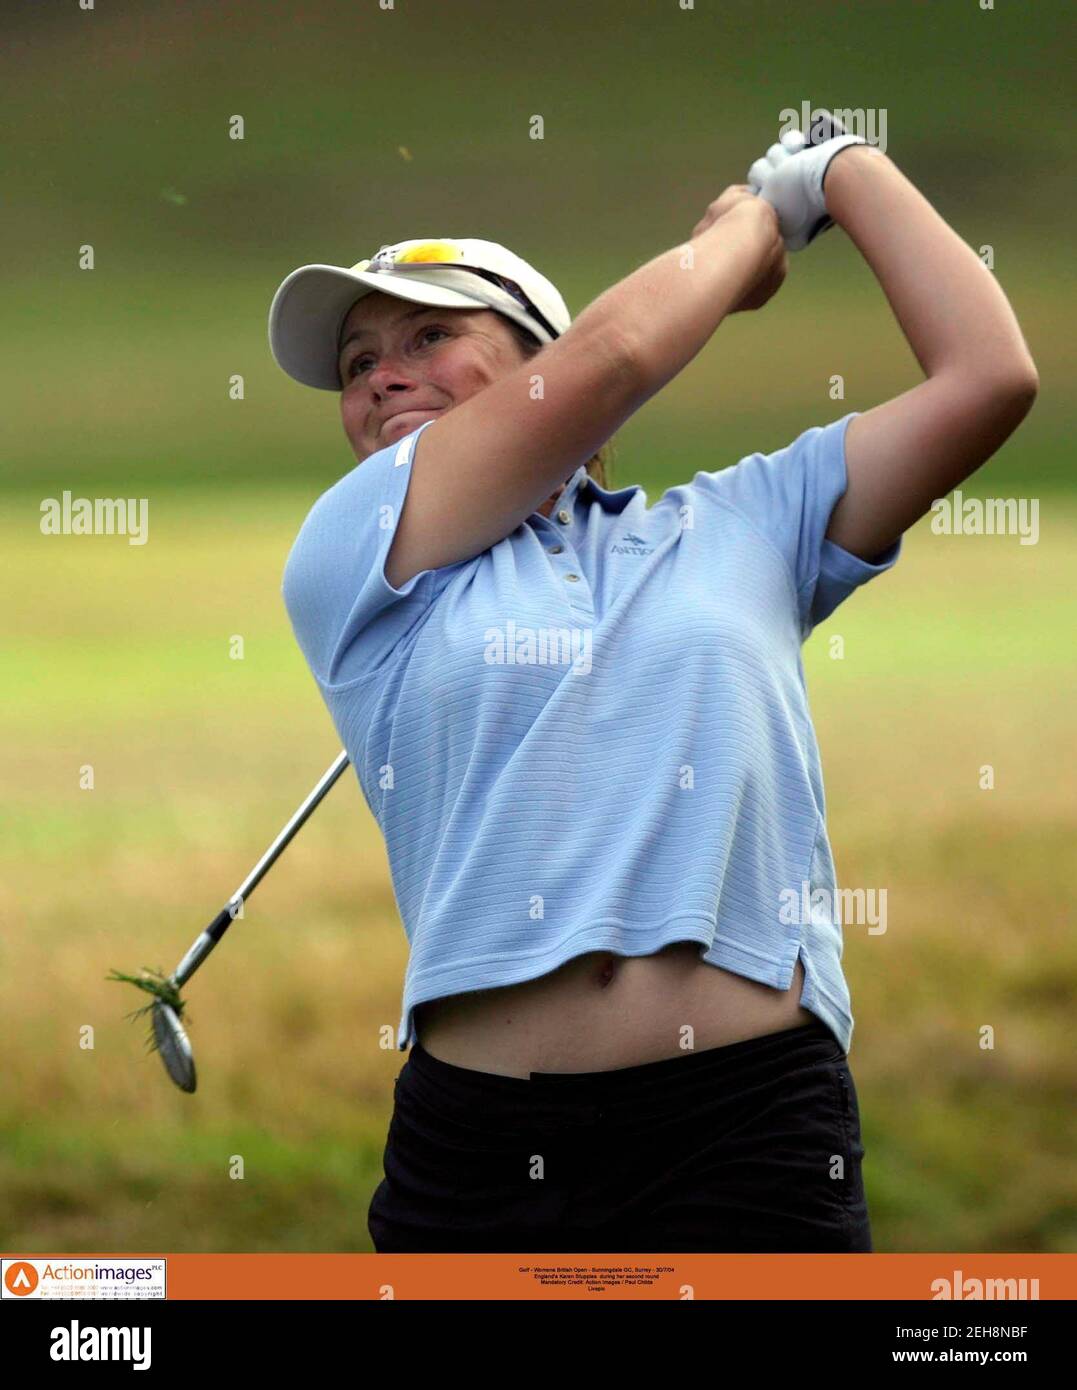 Golf - Women's British Open - Sunningdale GC, Surrey - 30/7/04 England's Karen  Stupples during her second round Mandatory Credit: Action Images / Paul  Childs Livepic Stock Photo - Alamy